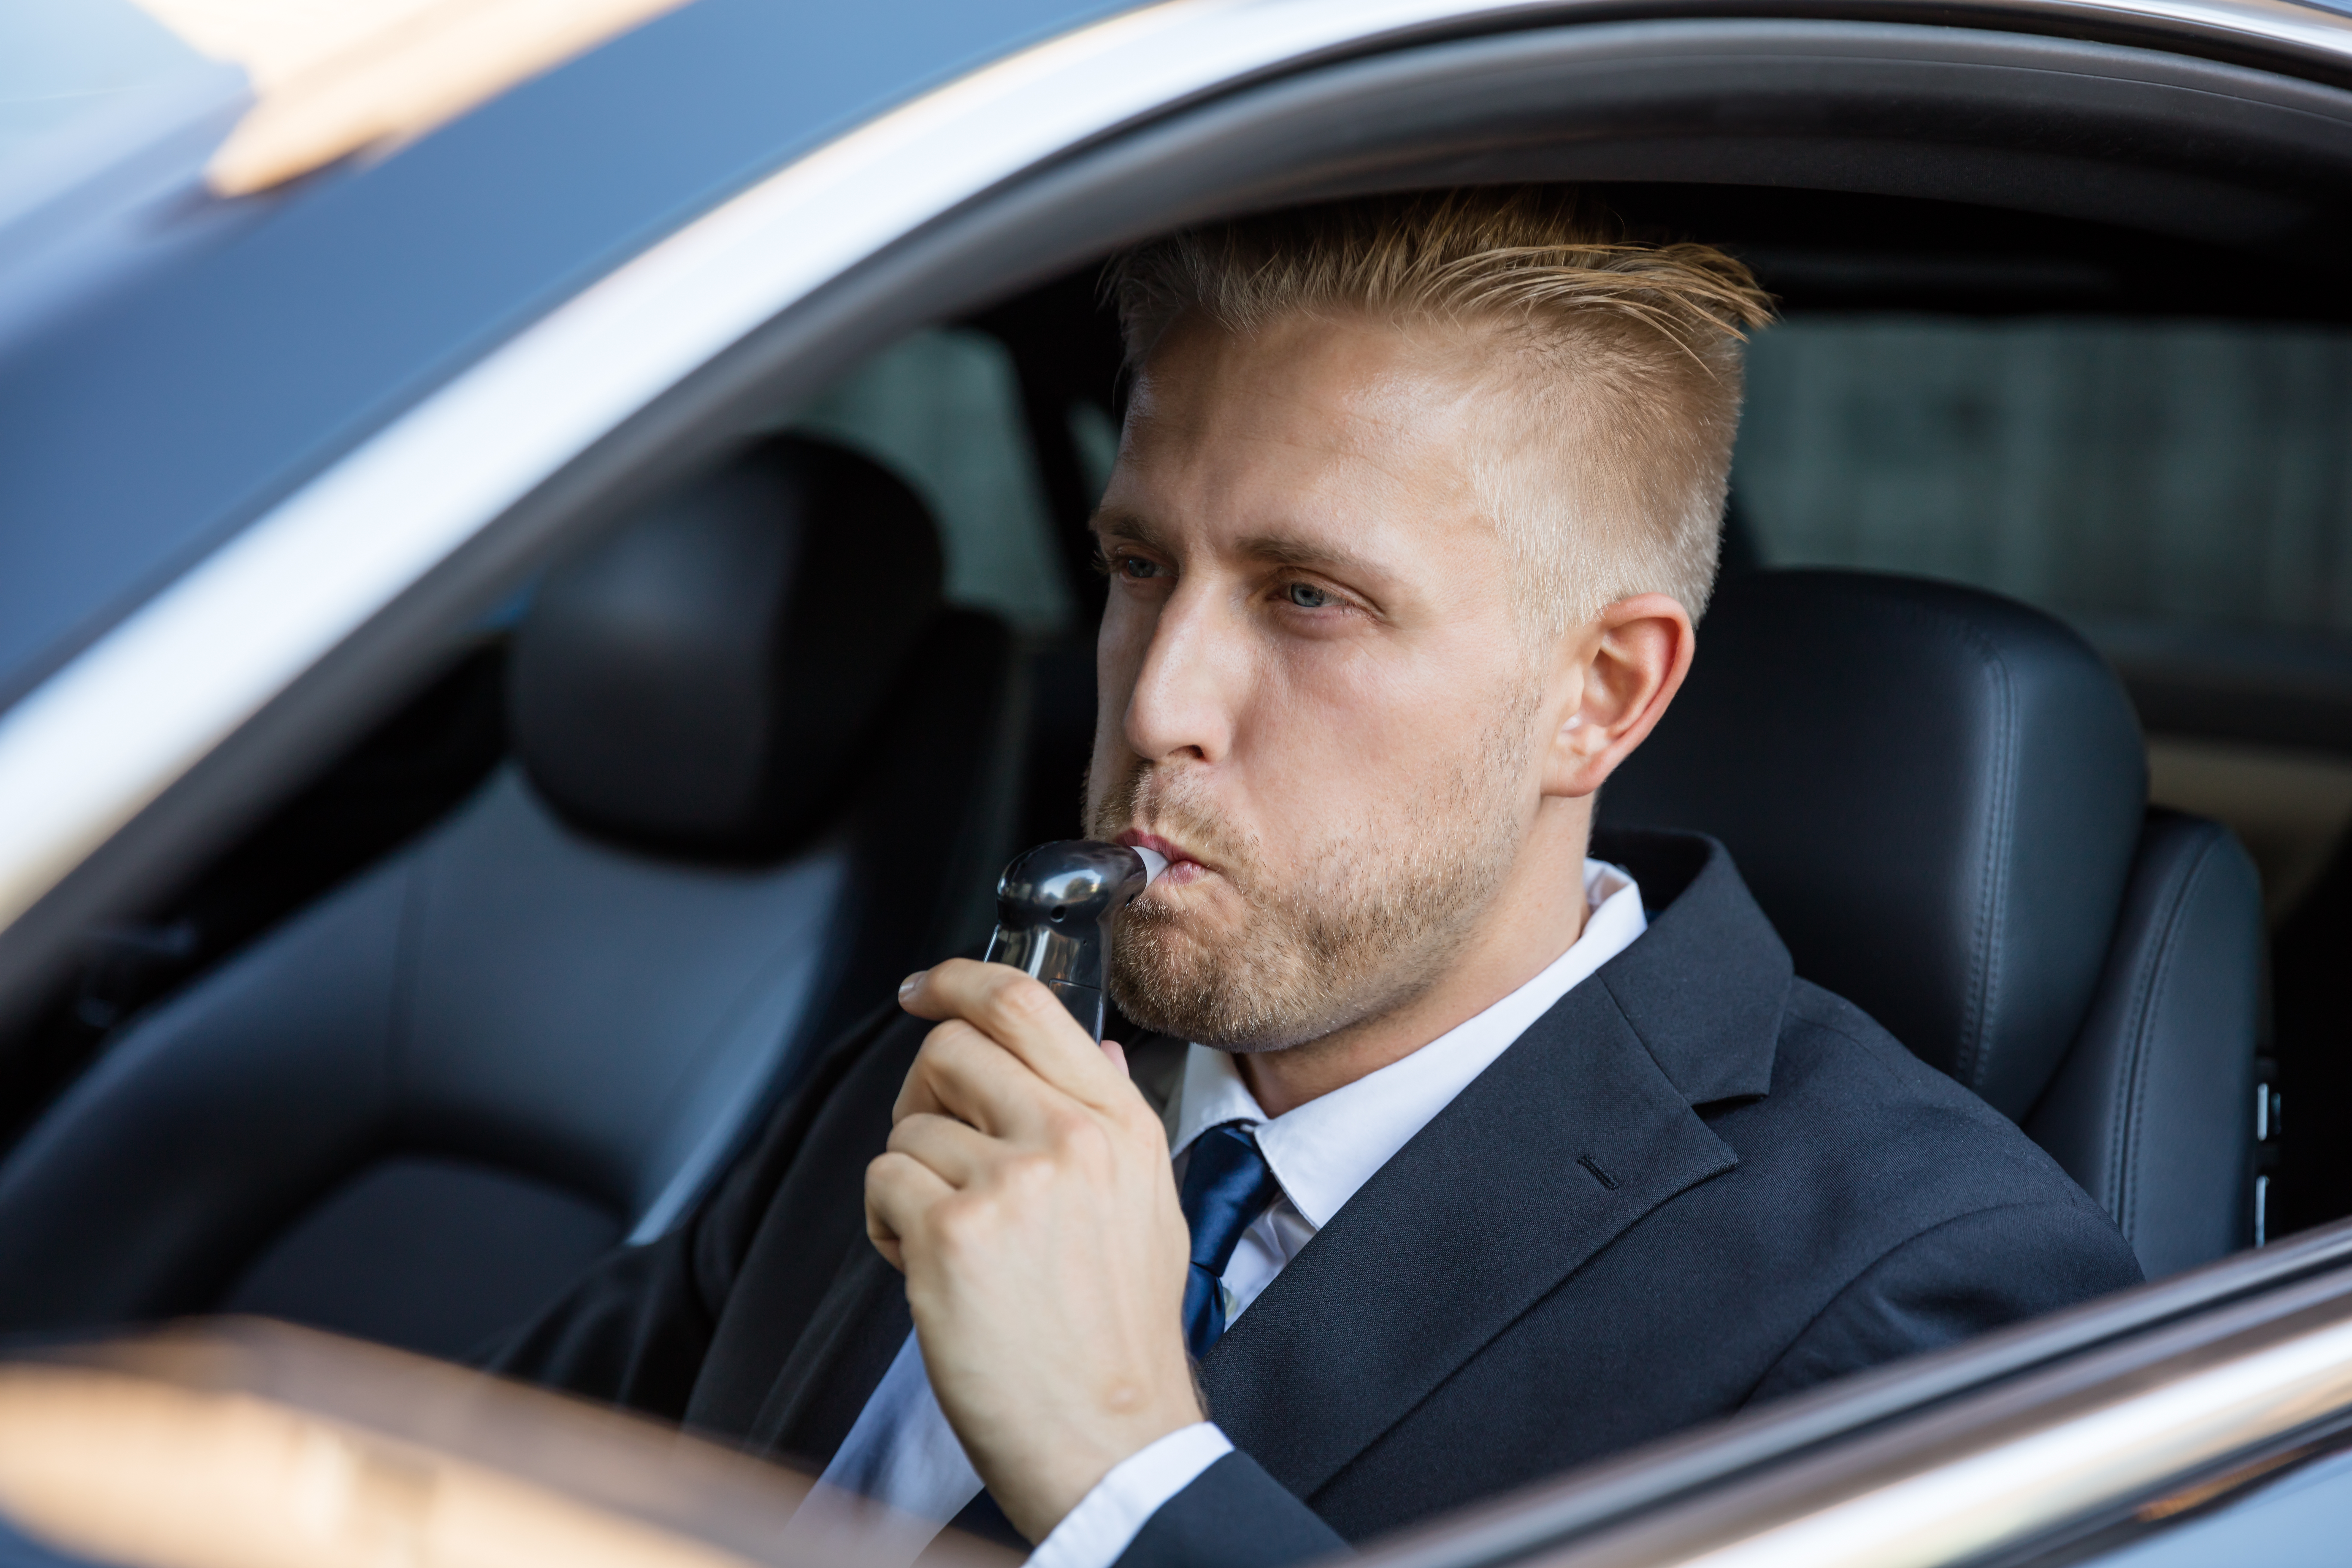 What Factors Could Affect Your Breathalyzer Test?